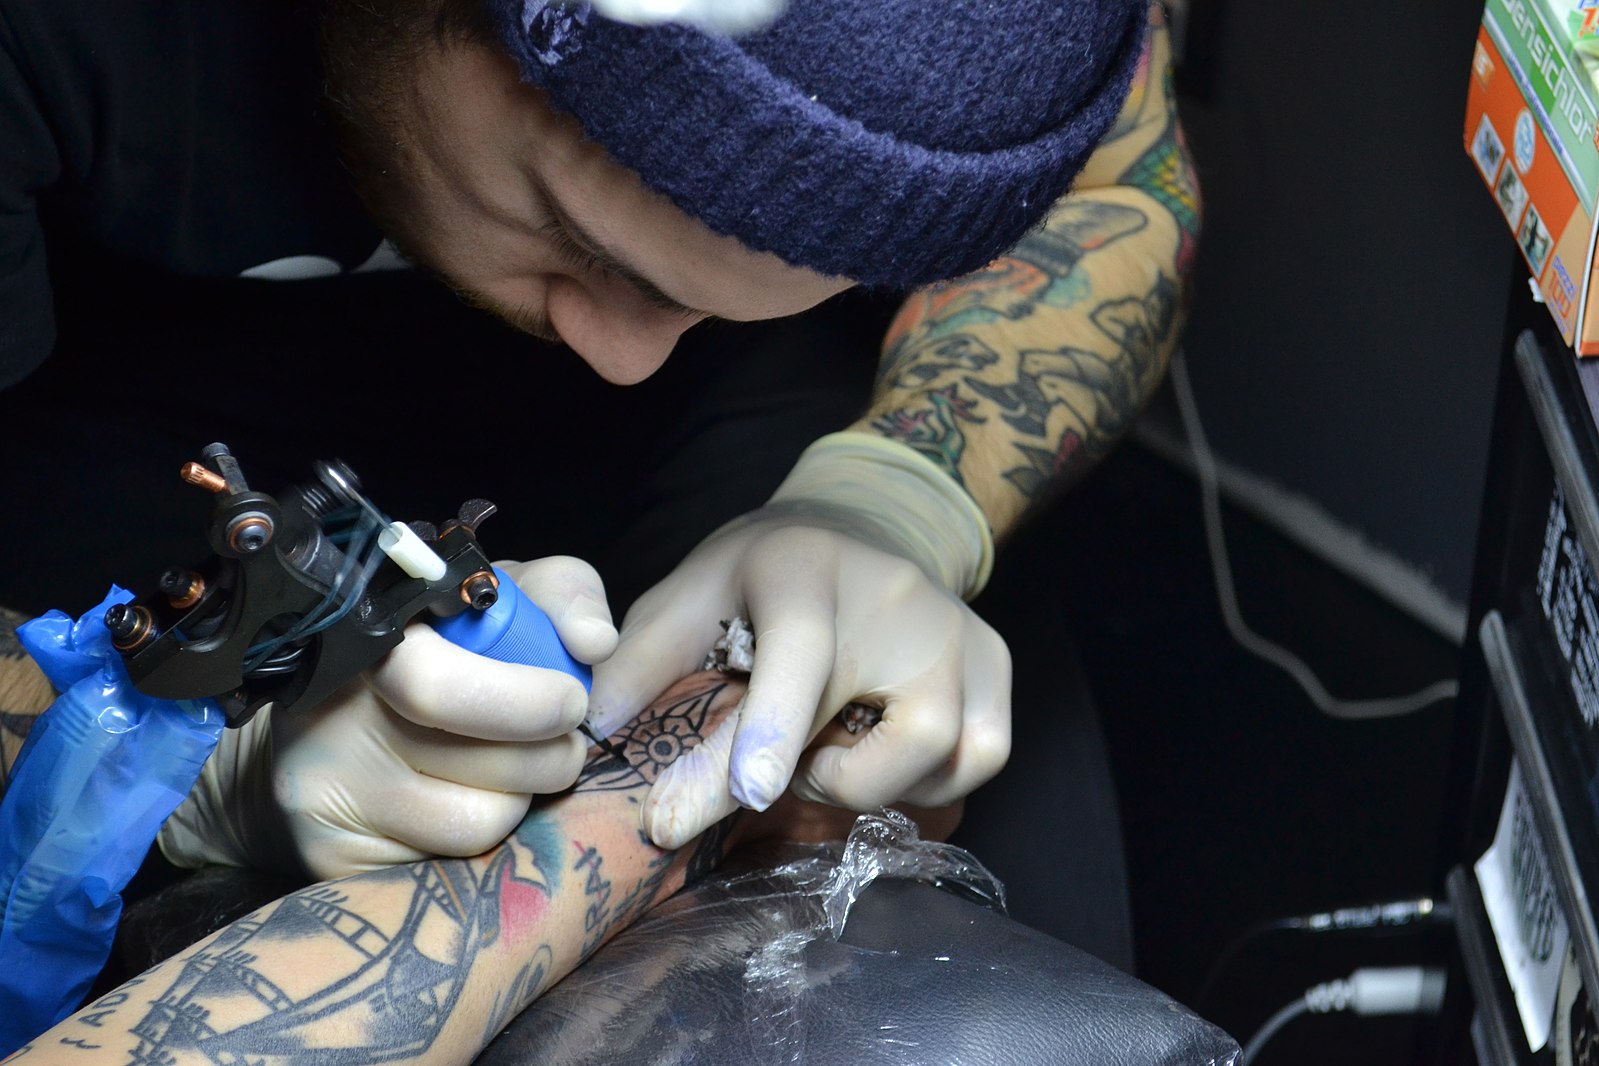 Tattoo apprenticeship: more than just ink